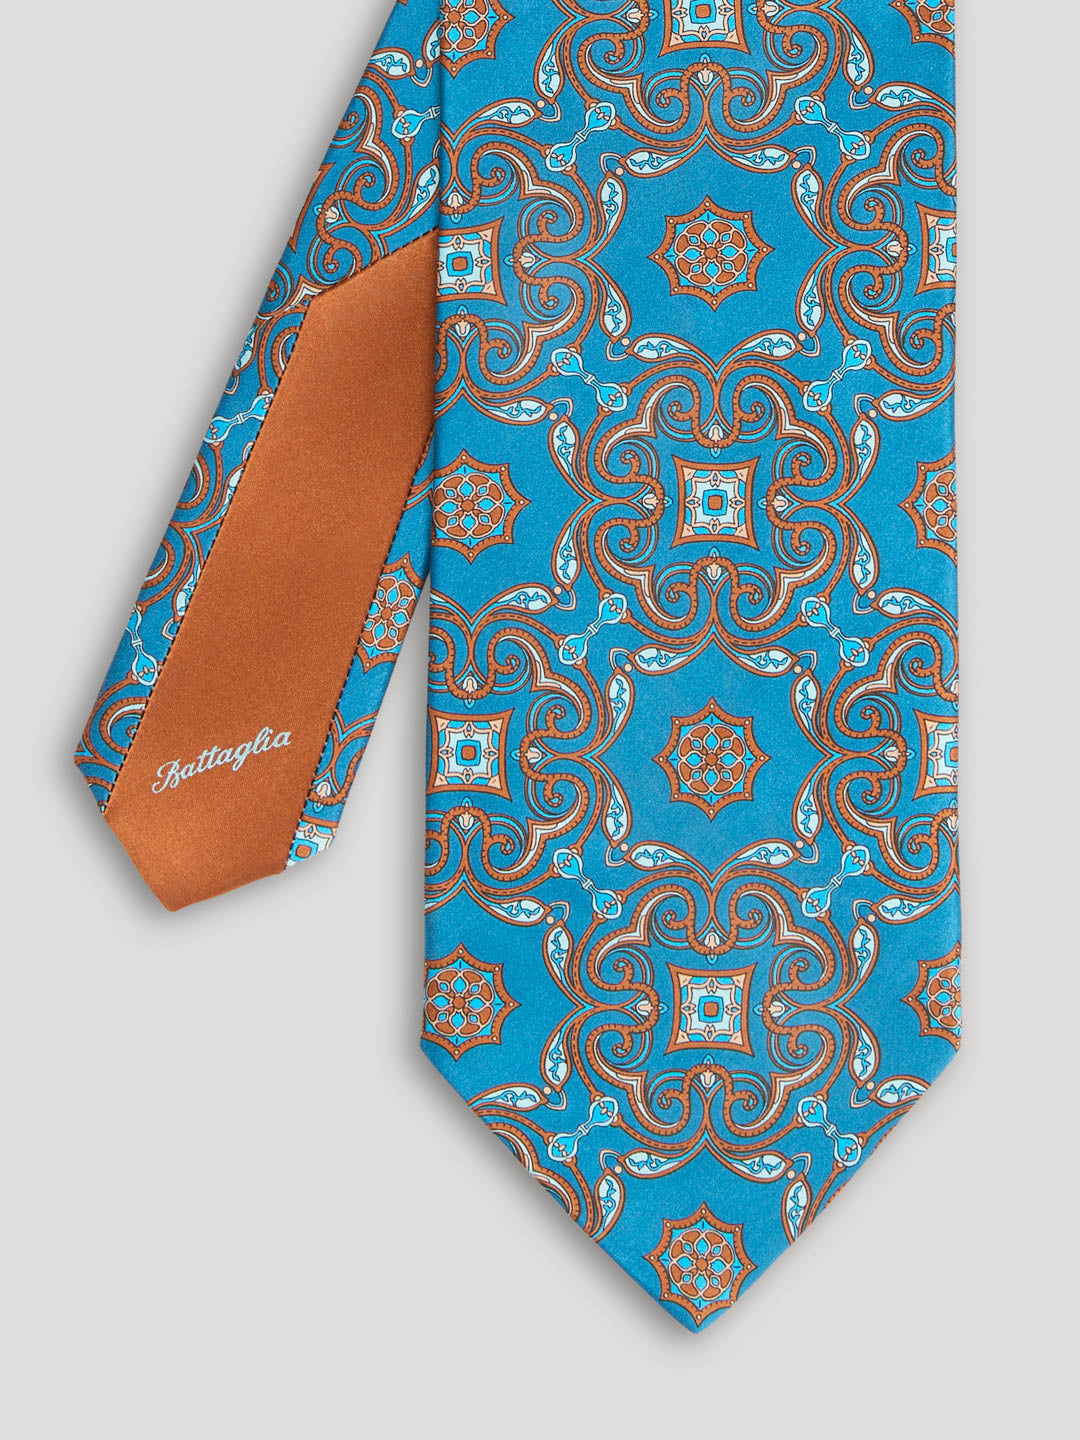 Turquoise and brown paisley tie.  